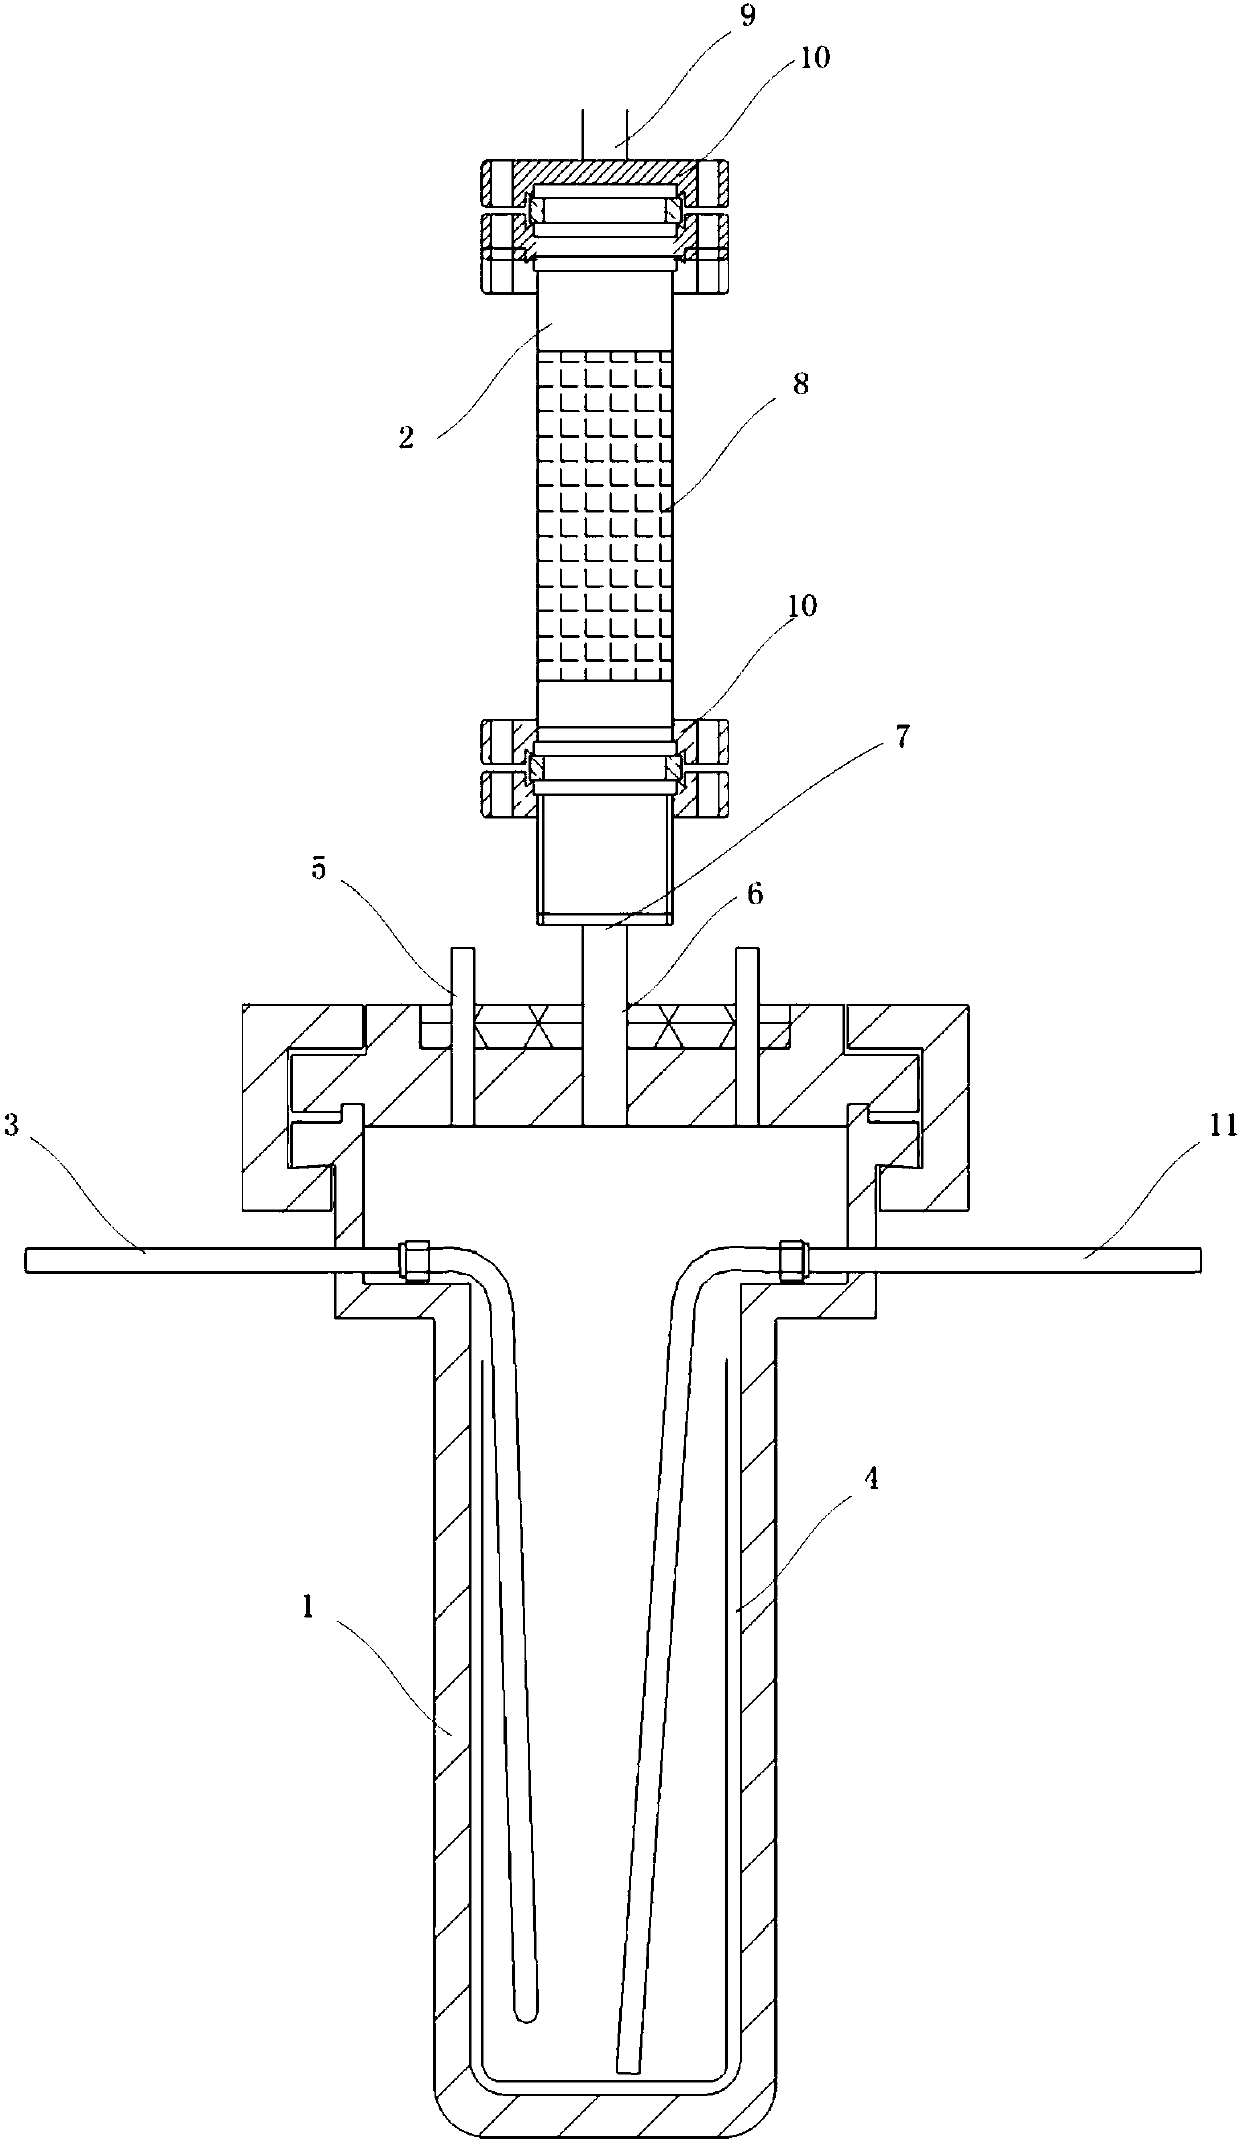 Reaction device for uranium fluorination reaction in molten salt system and operation method thereof